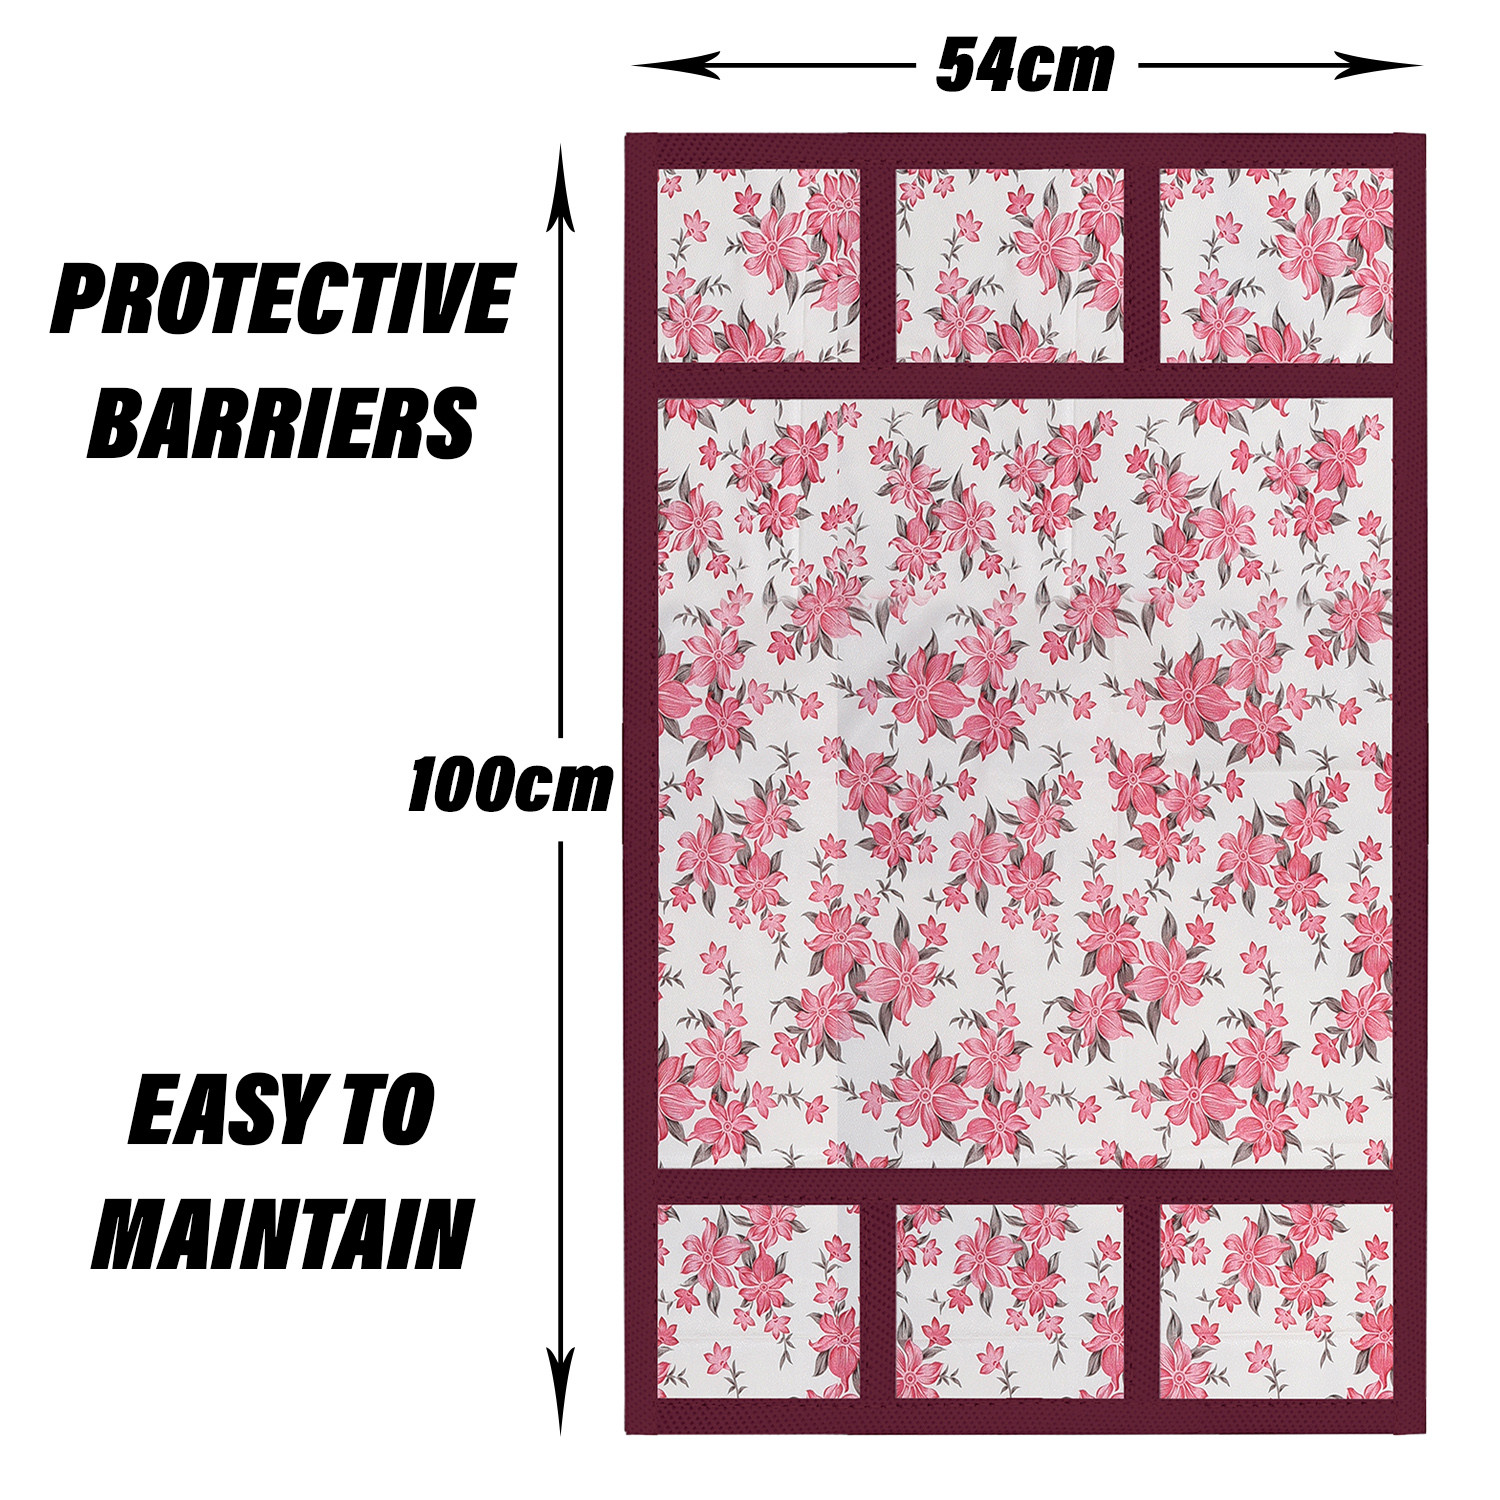 Kuber Industries Fridge Top Cover | Fridge Top Cover with Pockets | Refrigerator Top Cover for Kitchen | Fridge Top Cover with 6 Utility Pockets | Barik Flower Fridge Cover | Pink